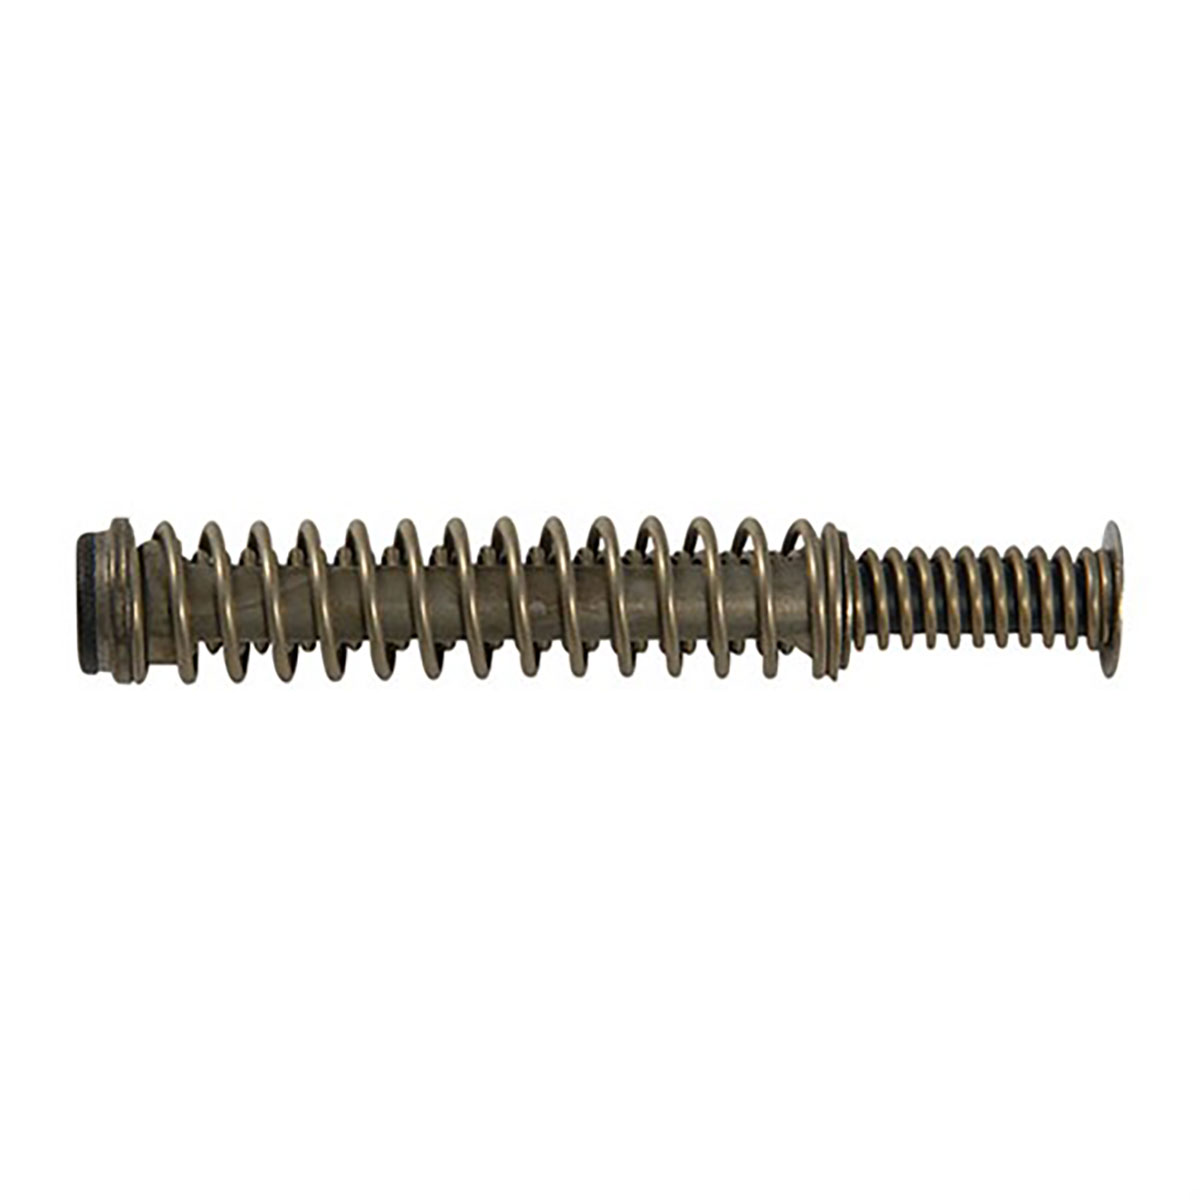 GLOCK - RECOIL SPRING ASSEMBLY - FITS G17T ONLY